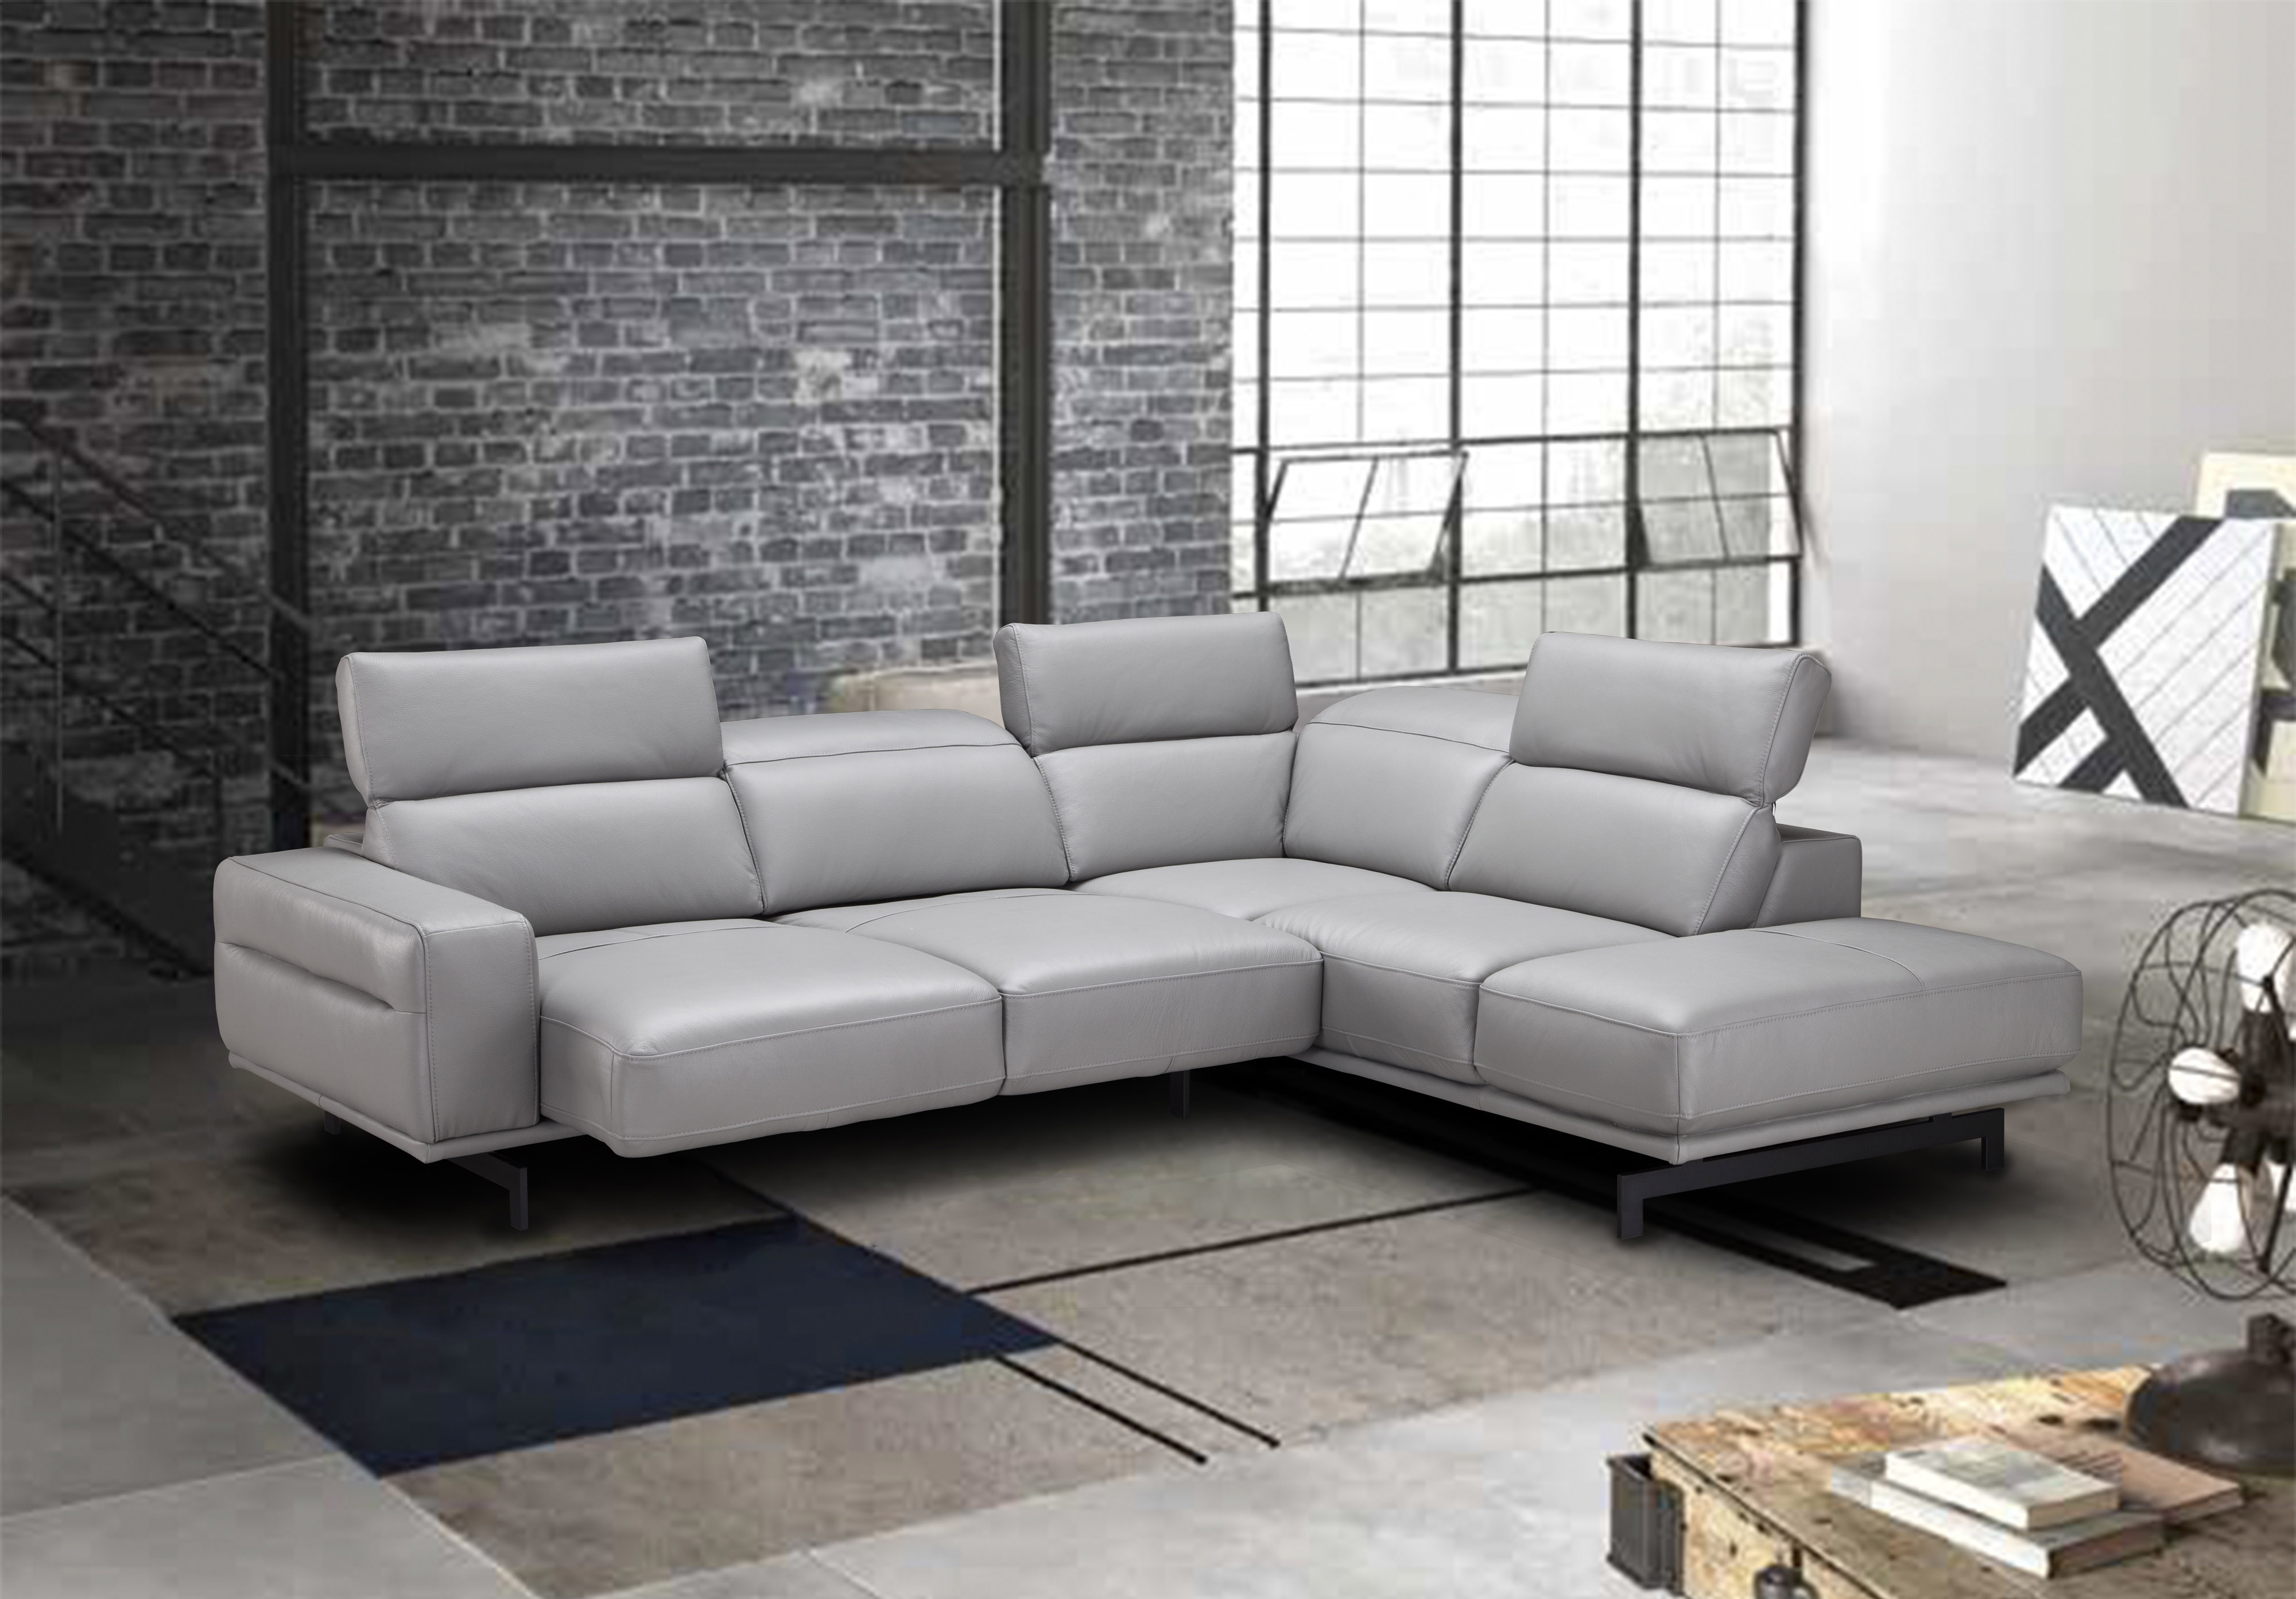 Adjustable Advanced Italian Top Grain, Light Grey Leather Sectional With Chaise